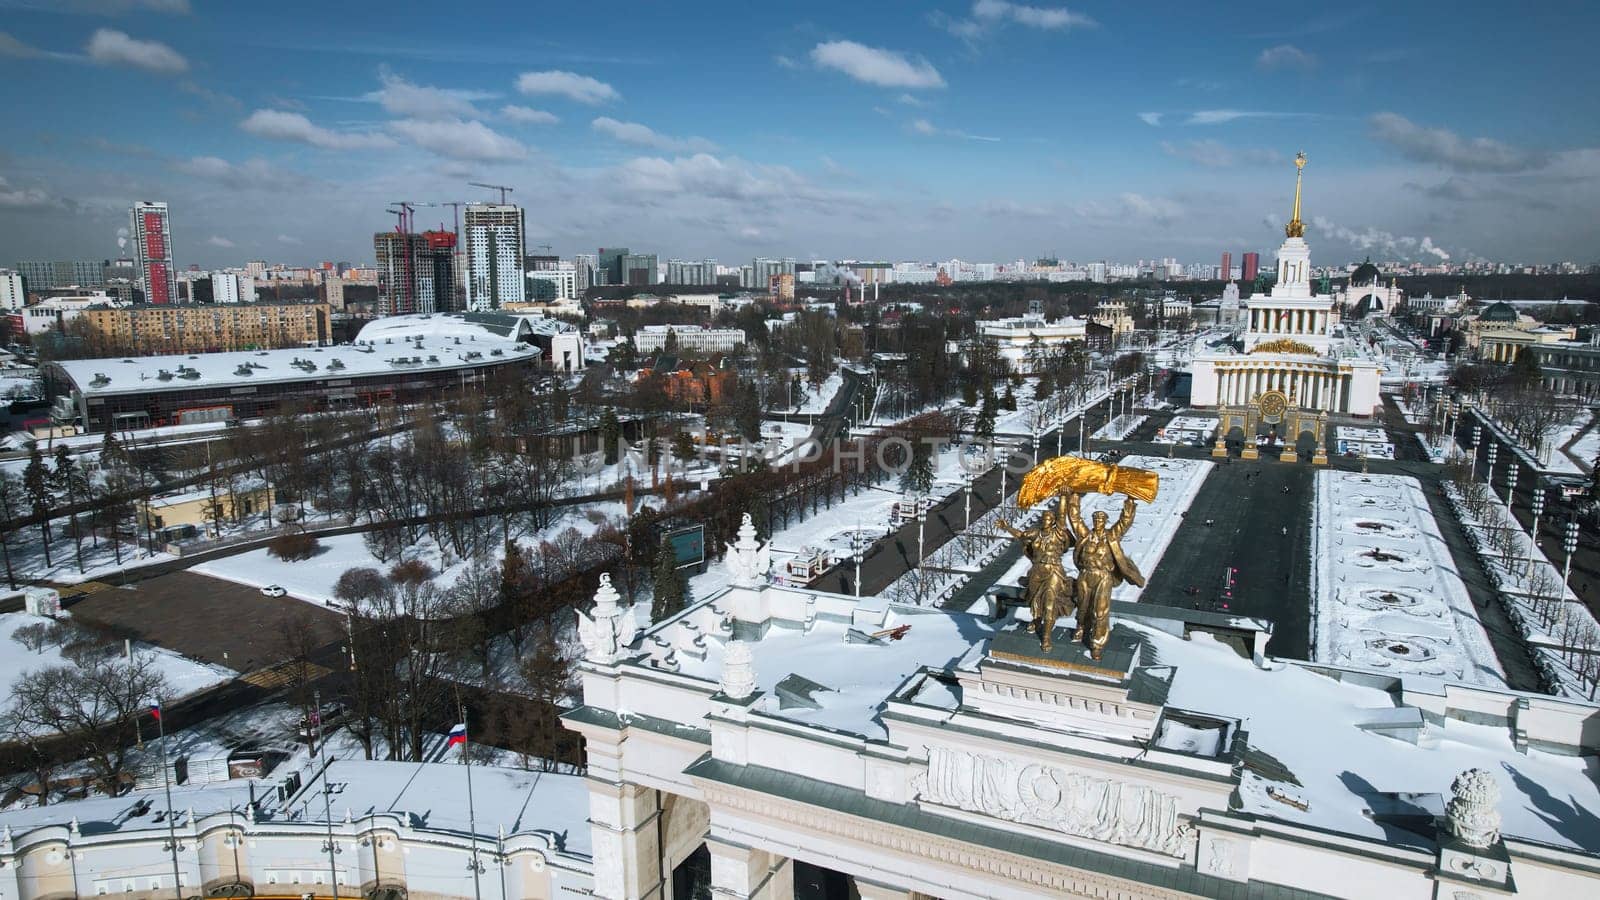 Top view of historic Soviet Square in winter. Creative. Historical buildings with monuments and arches in city center. Winter cityscape with historical center and square.